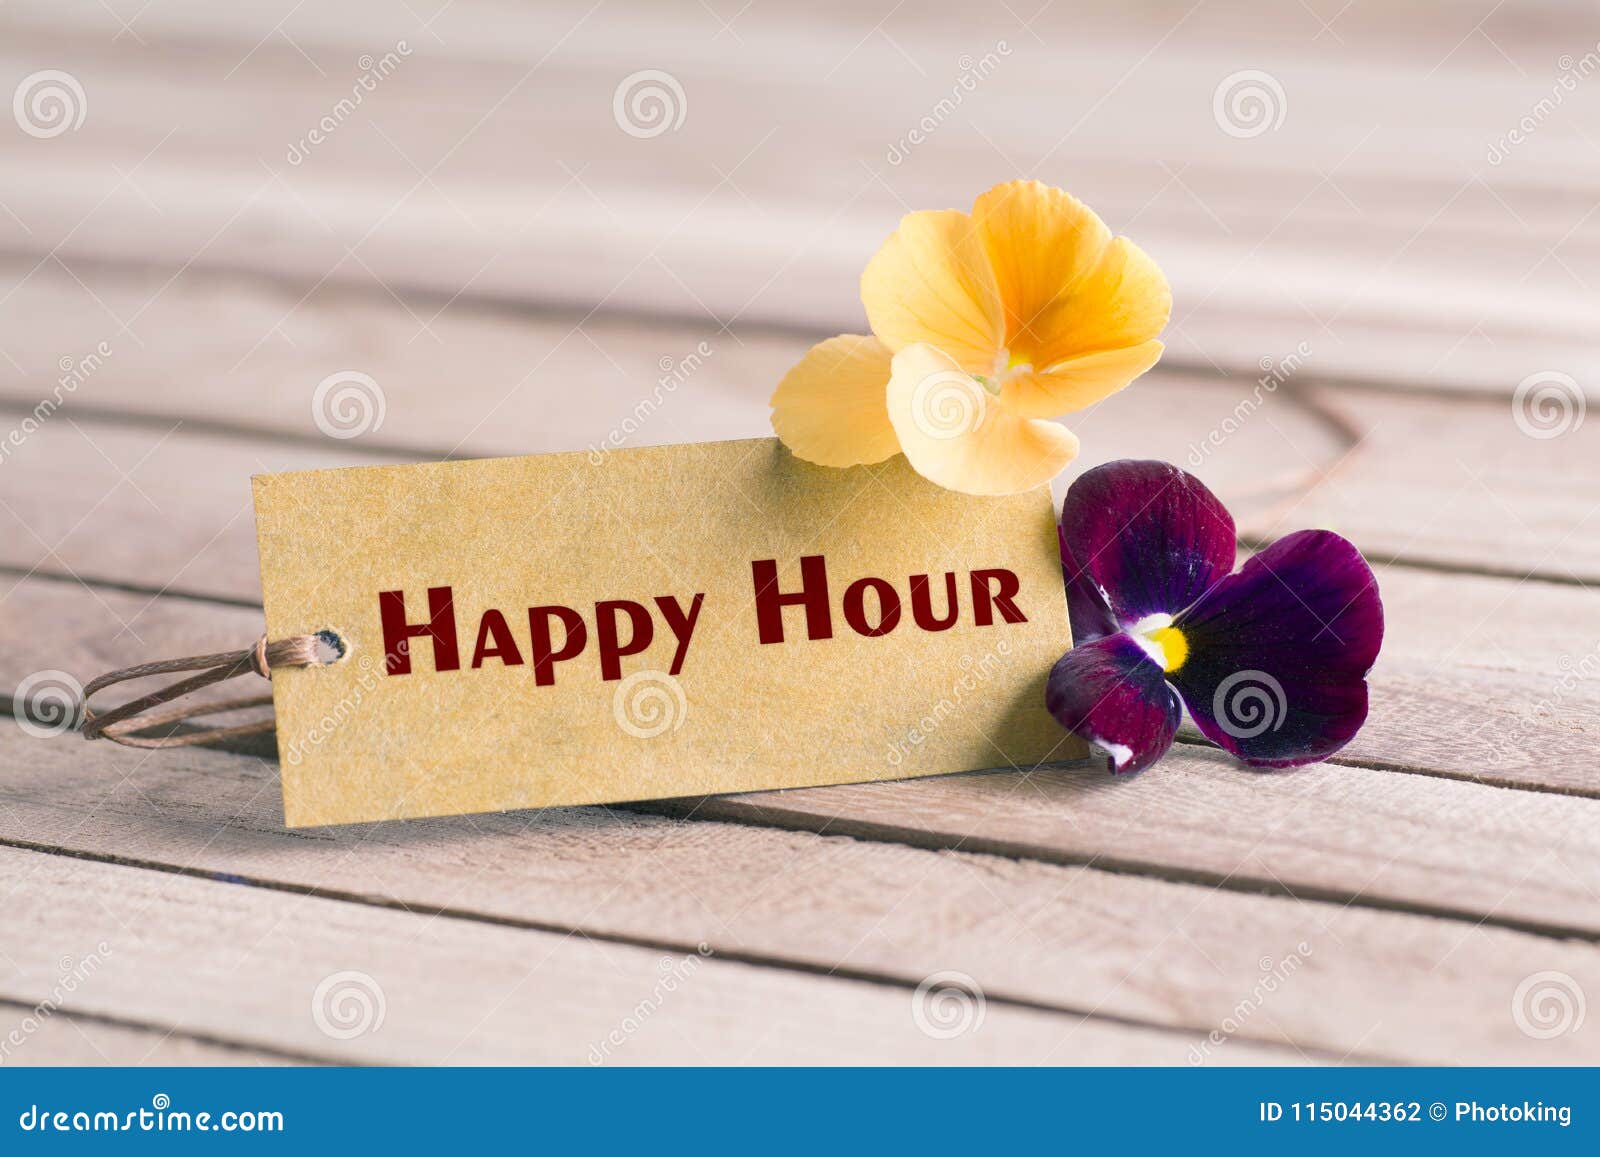 happy hour tag